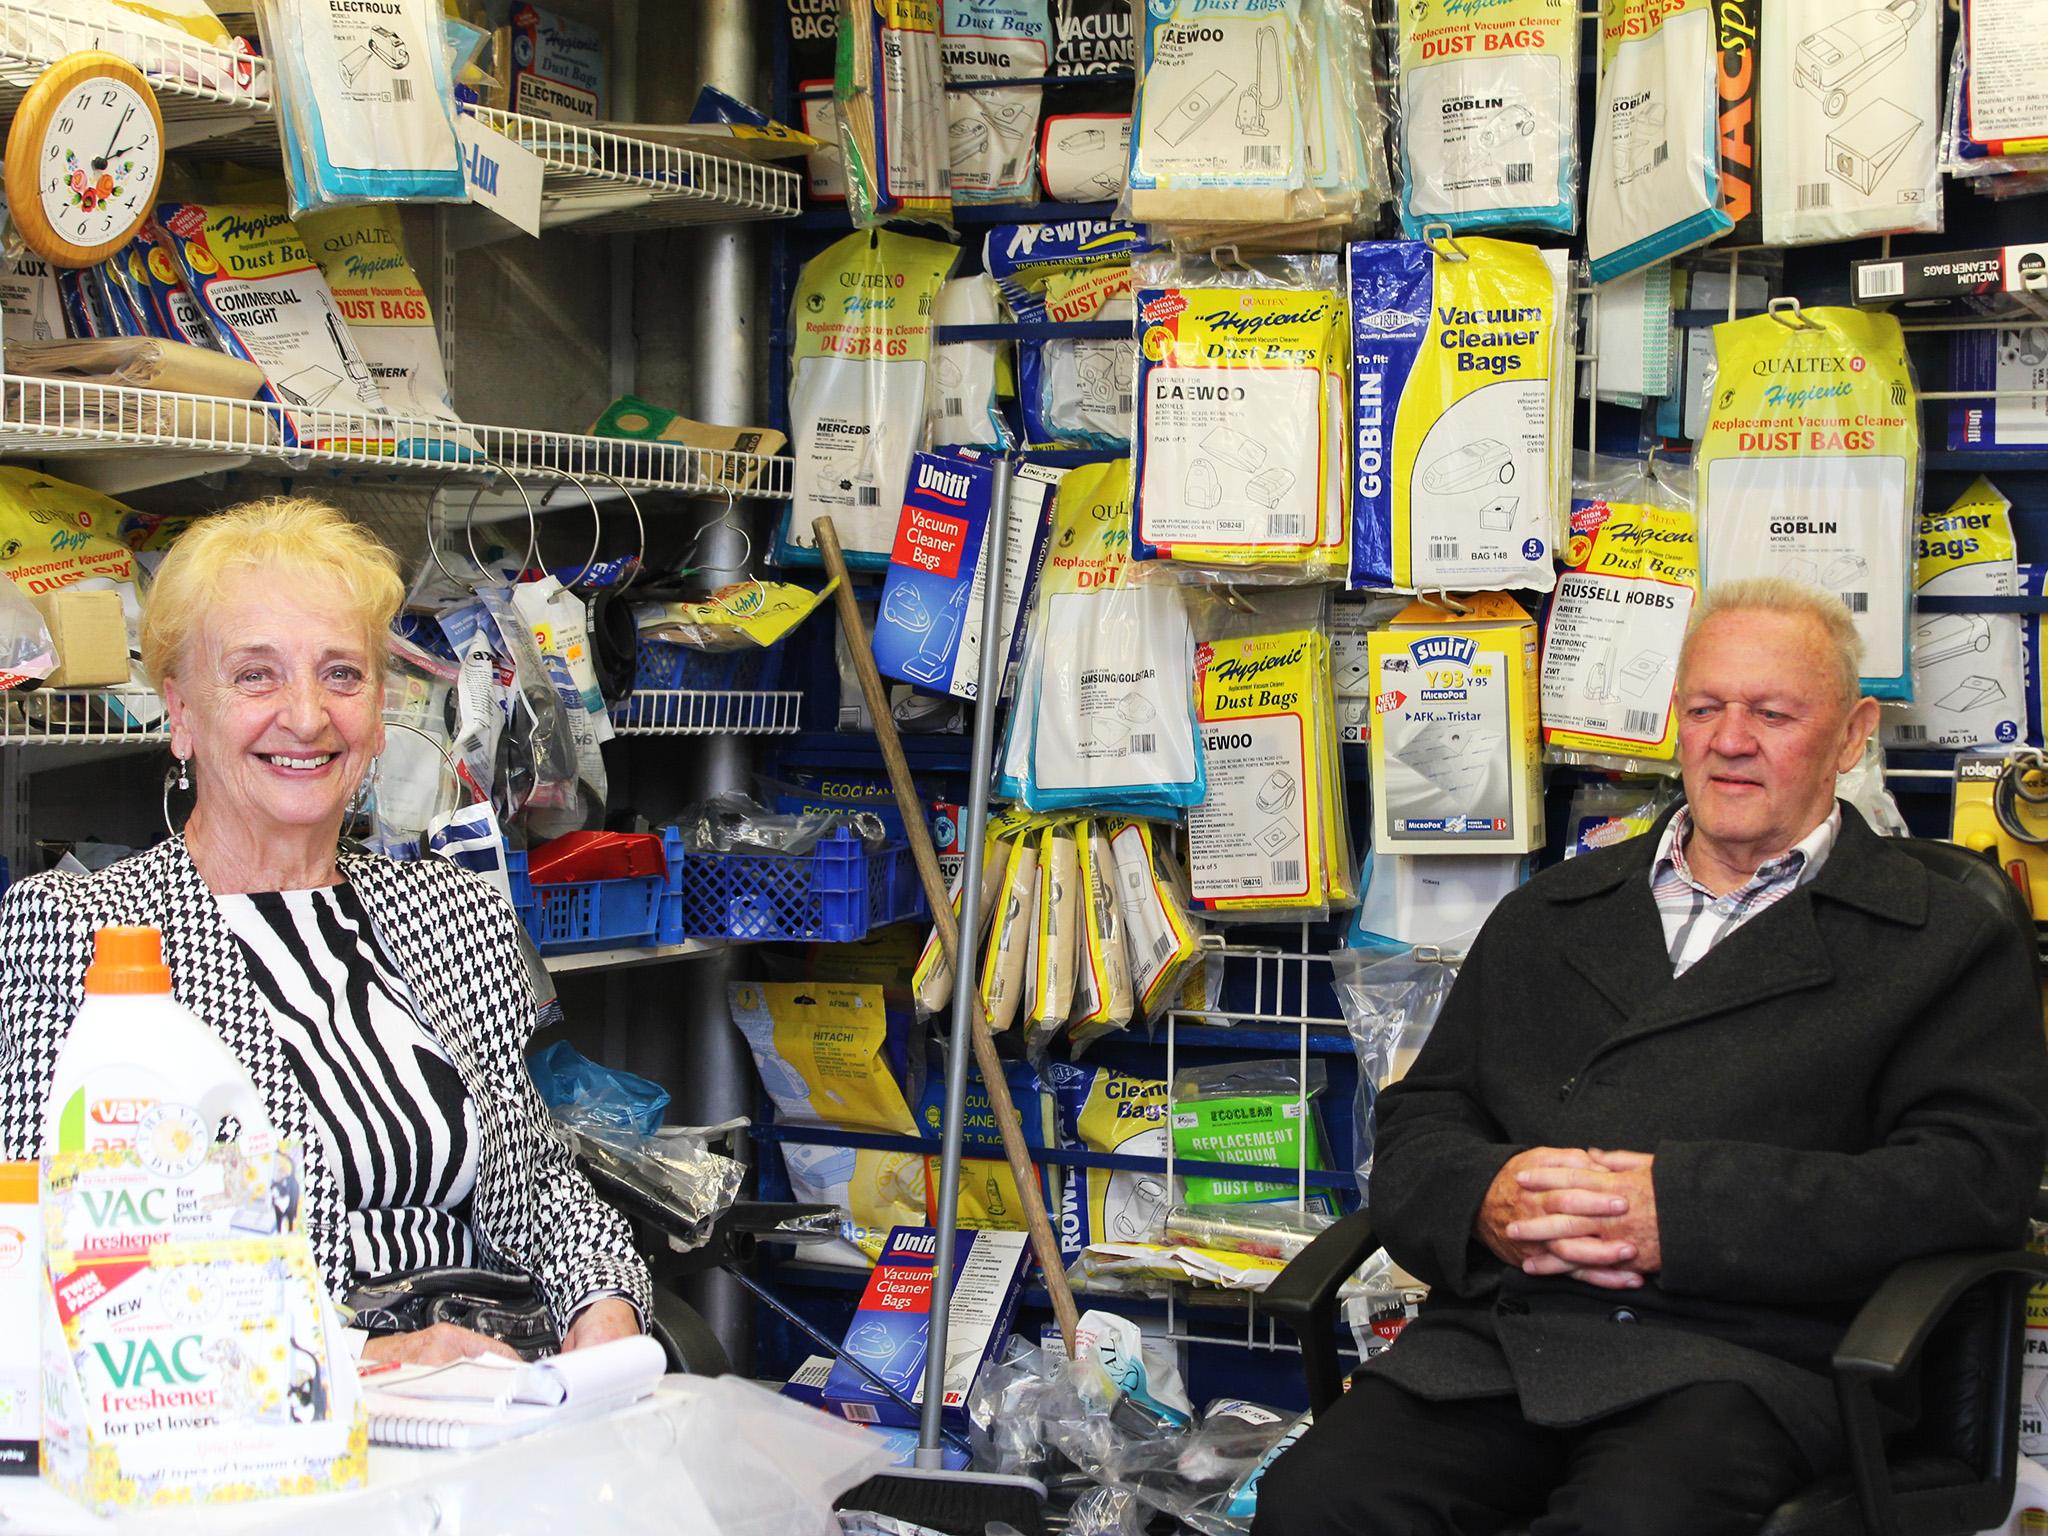 &#13;
Roger and Barbara have chosen to vote Conservative in this election – despite never voting for them before &#13;